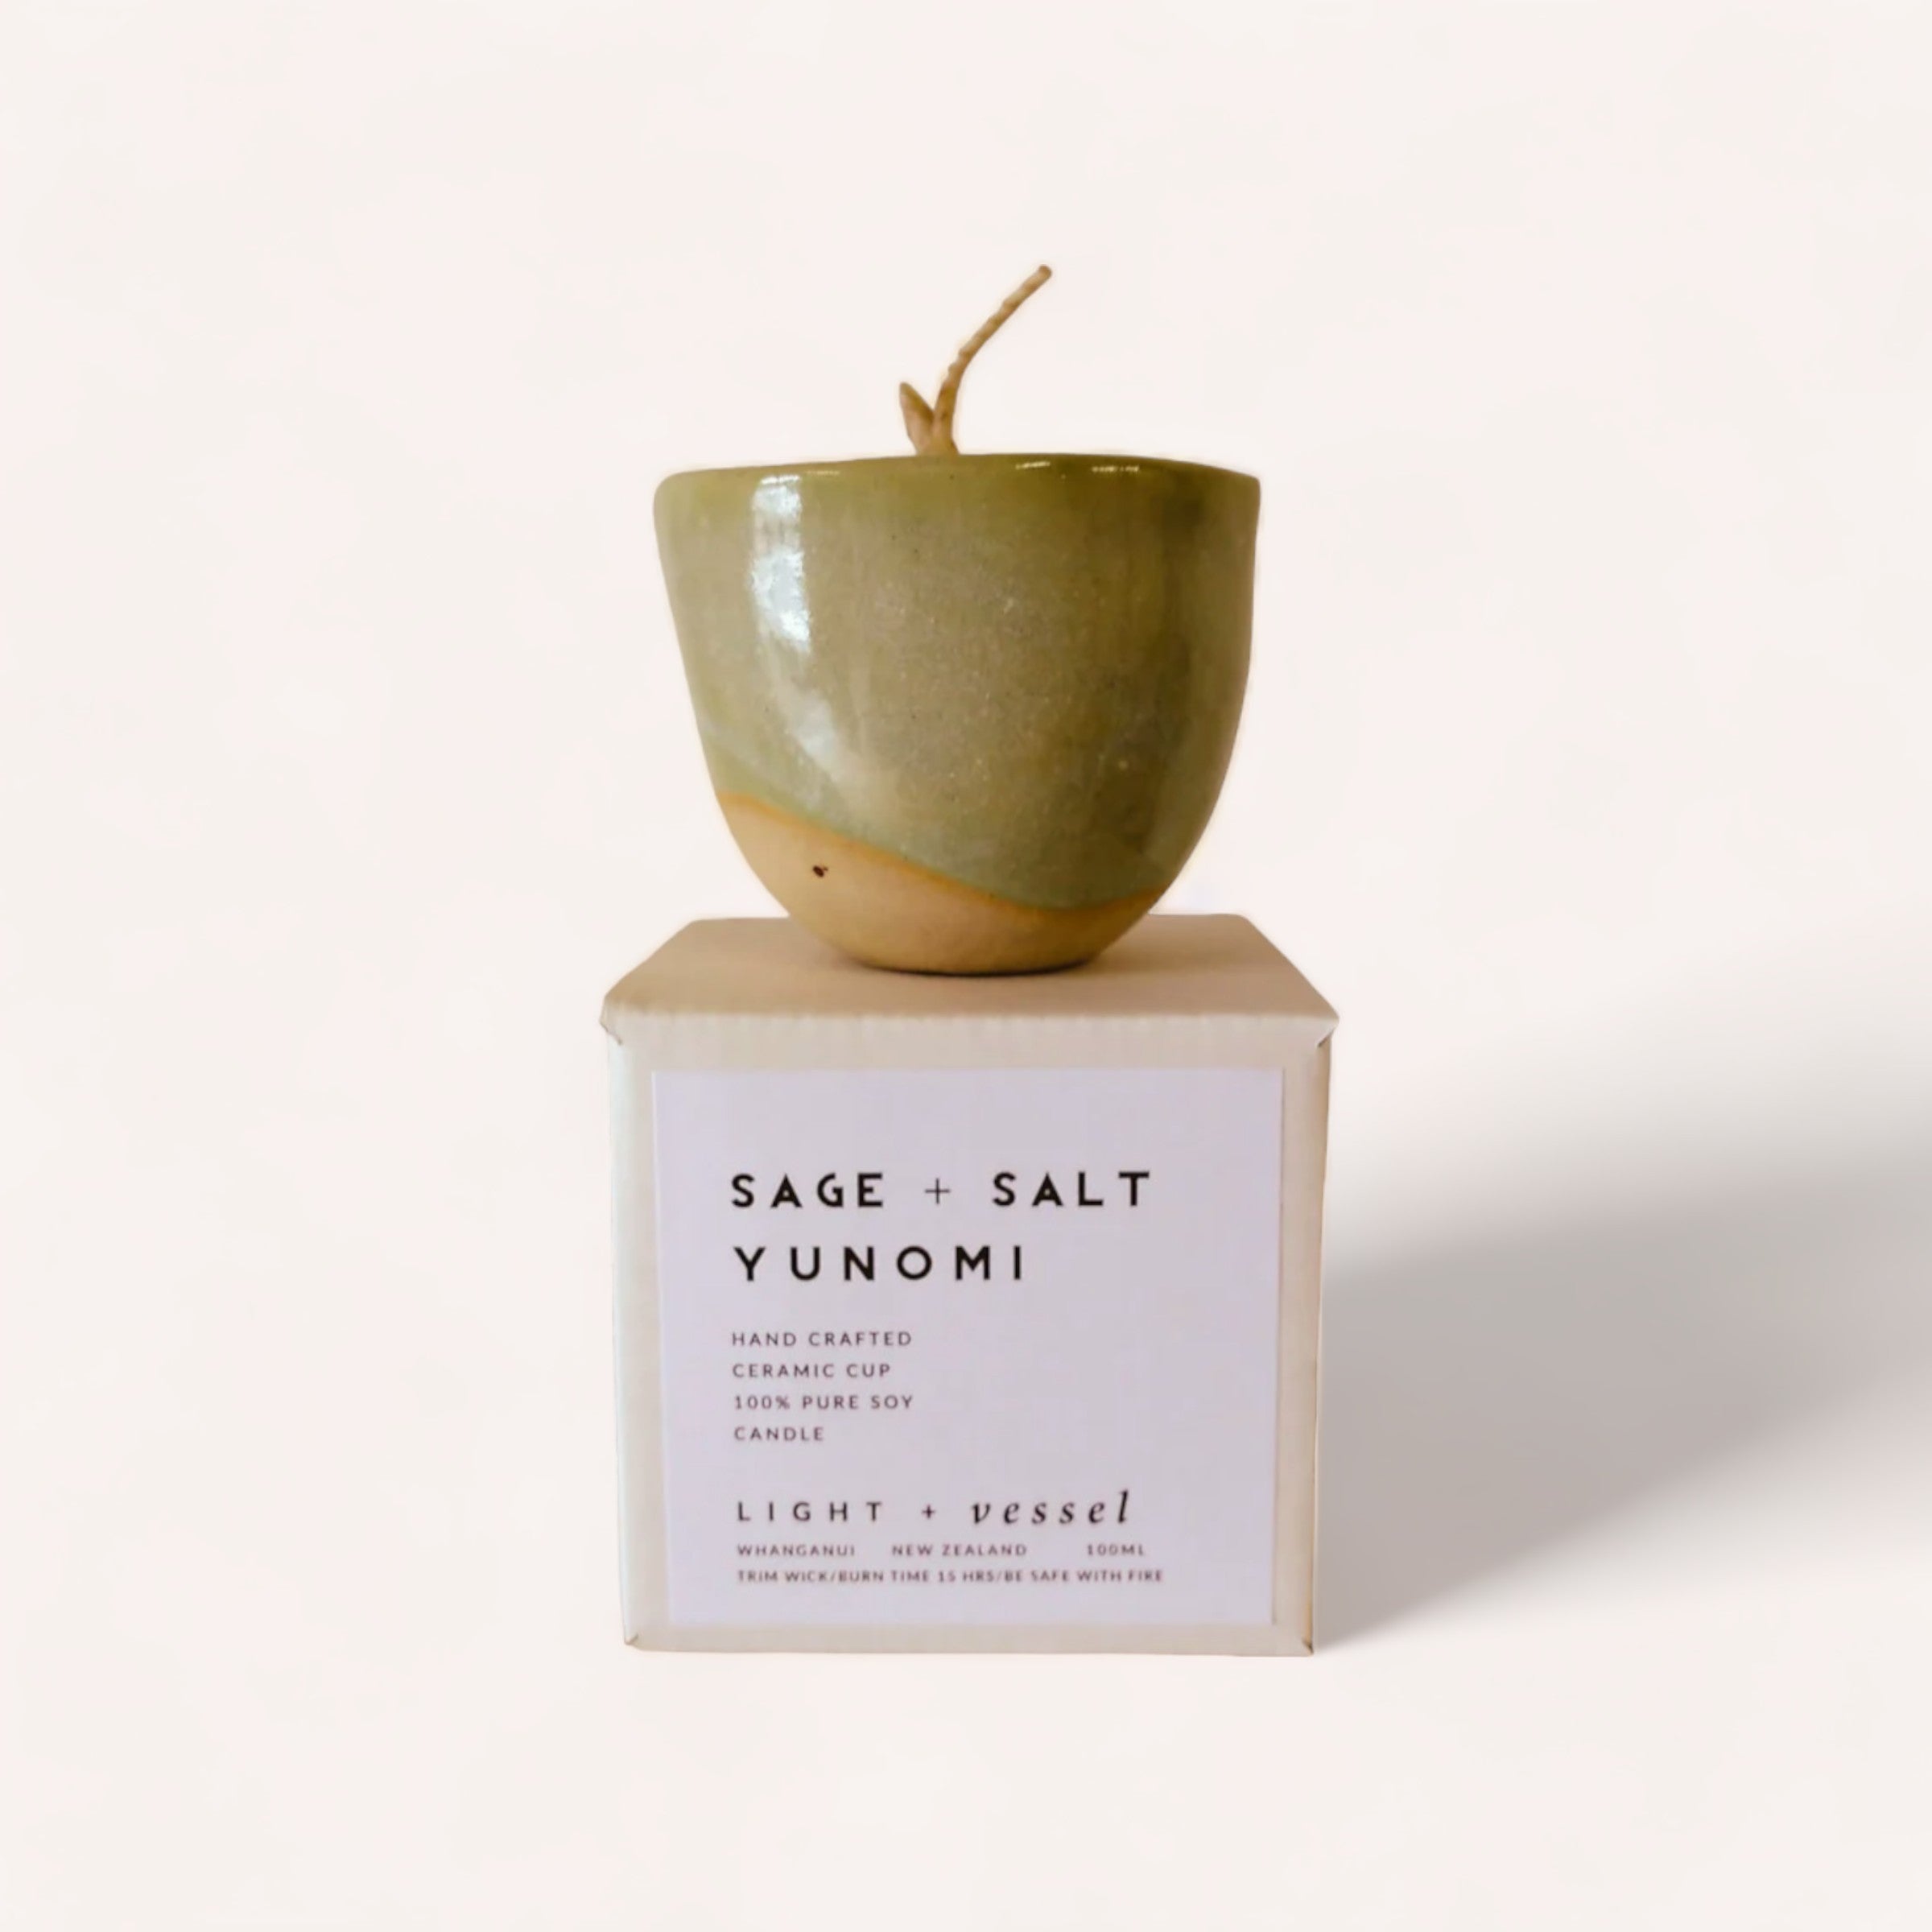 A handcrafted Sage + Salt Candle by Light + Vessel in a sage green yunomi cup, displayed on a white box labeled "sage + salt yunomi" with description texts, against a plain white background.